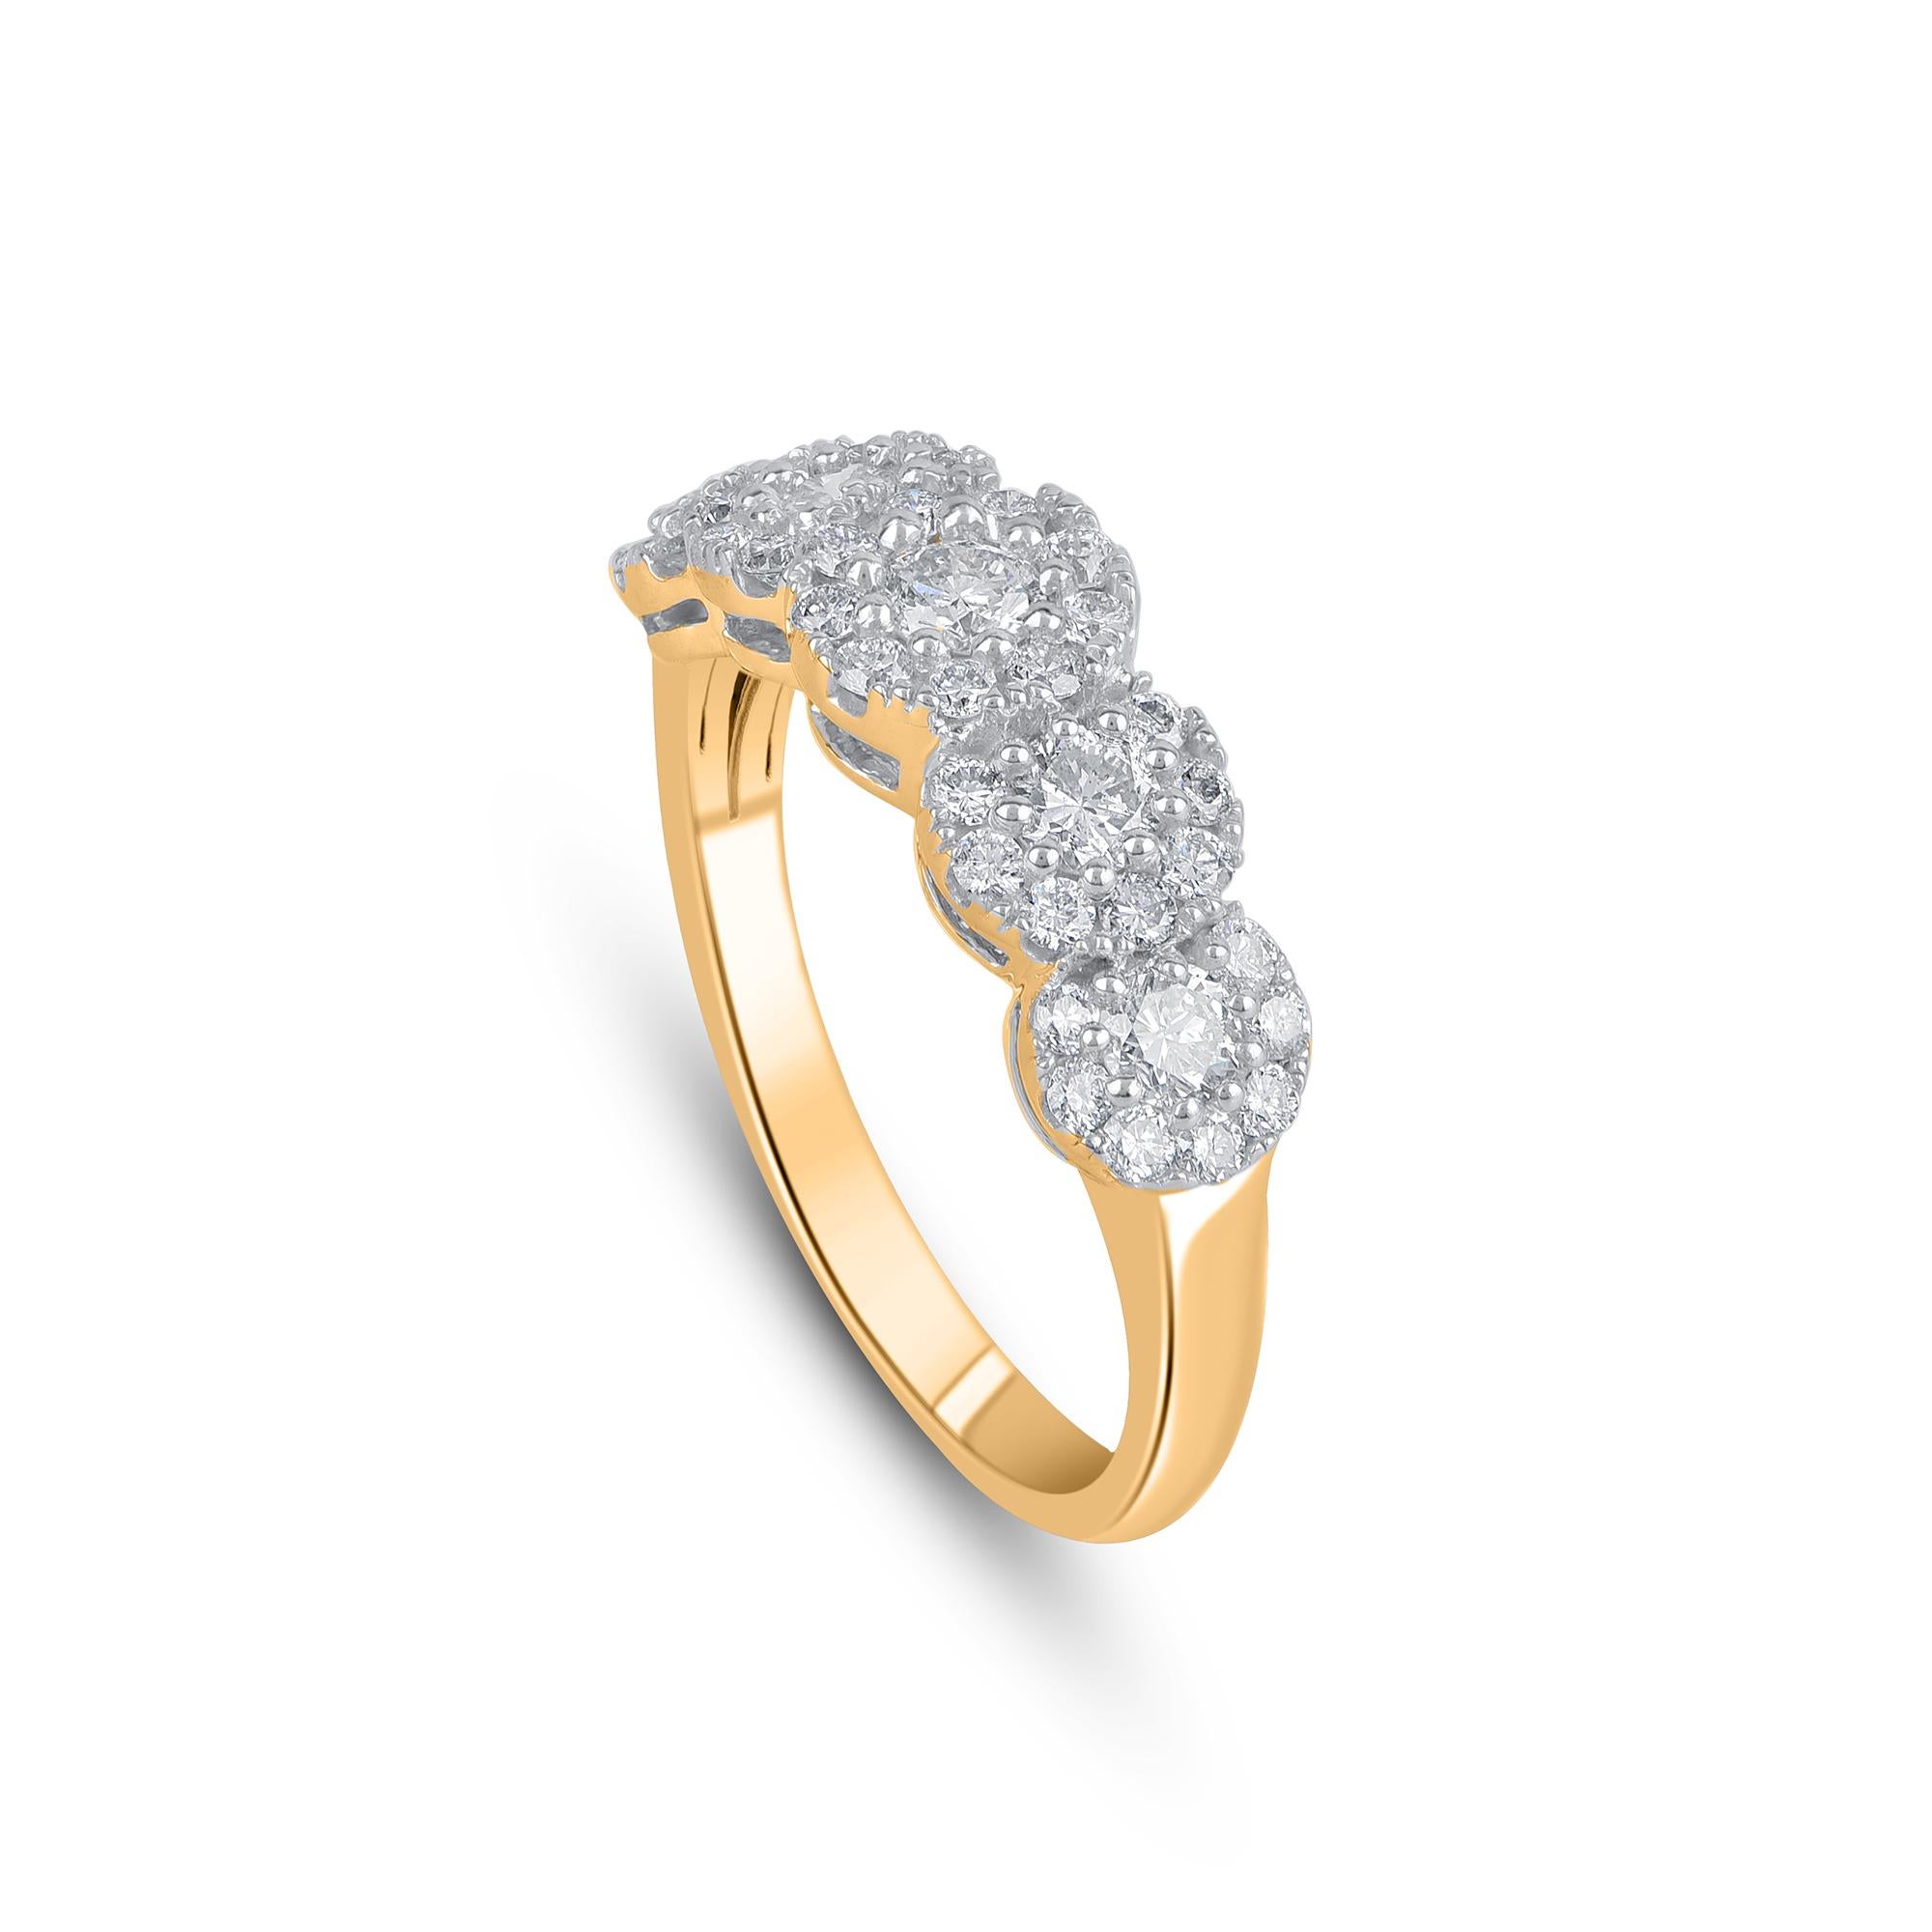 Express your love for her in the most classic way with this diamond ring. Crafted in 14 Karat yellow gold. This wedding ring features a sparkling 42 brilliant cut round diamond beautifully set in prong setting. The total diamond weight is 1.0 Carat.